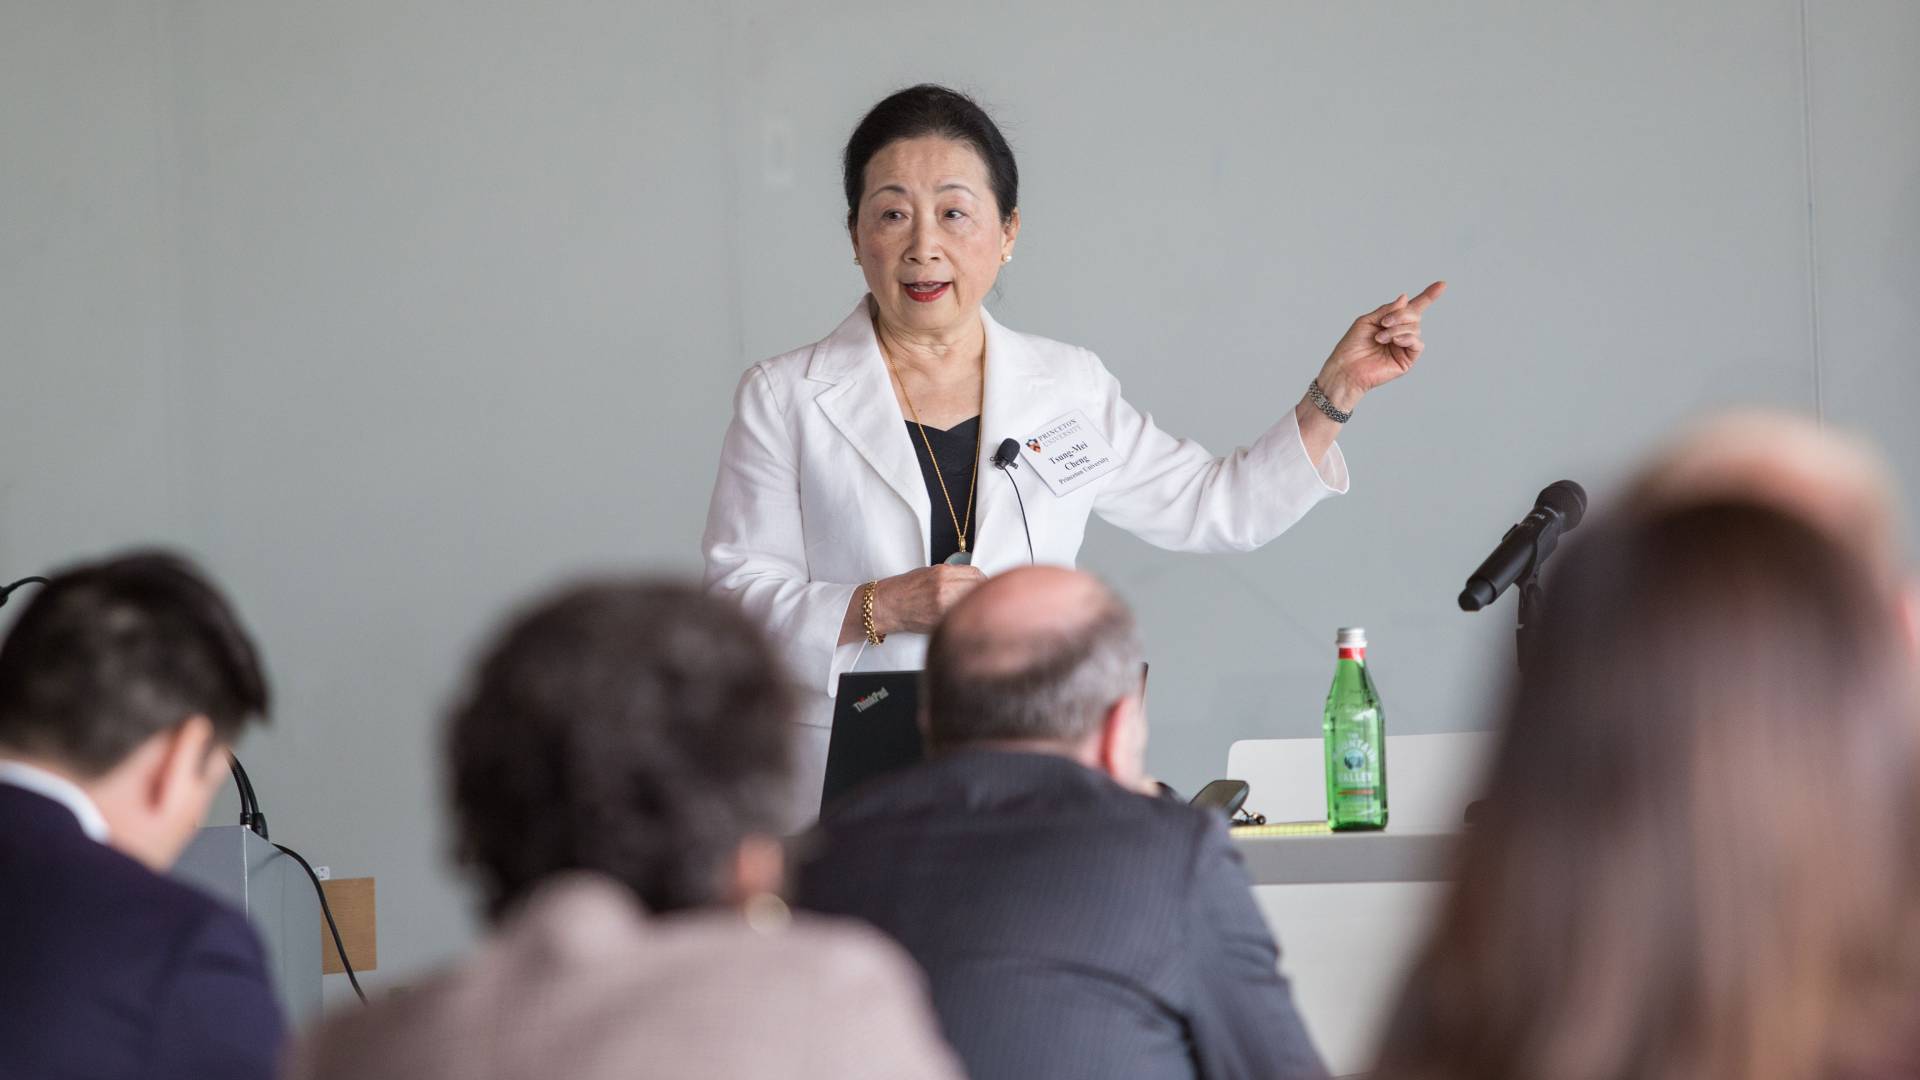 Tsung-Mei Cheng speaks in front of an audience